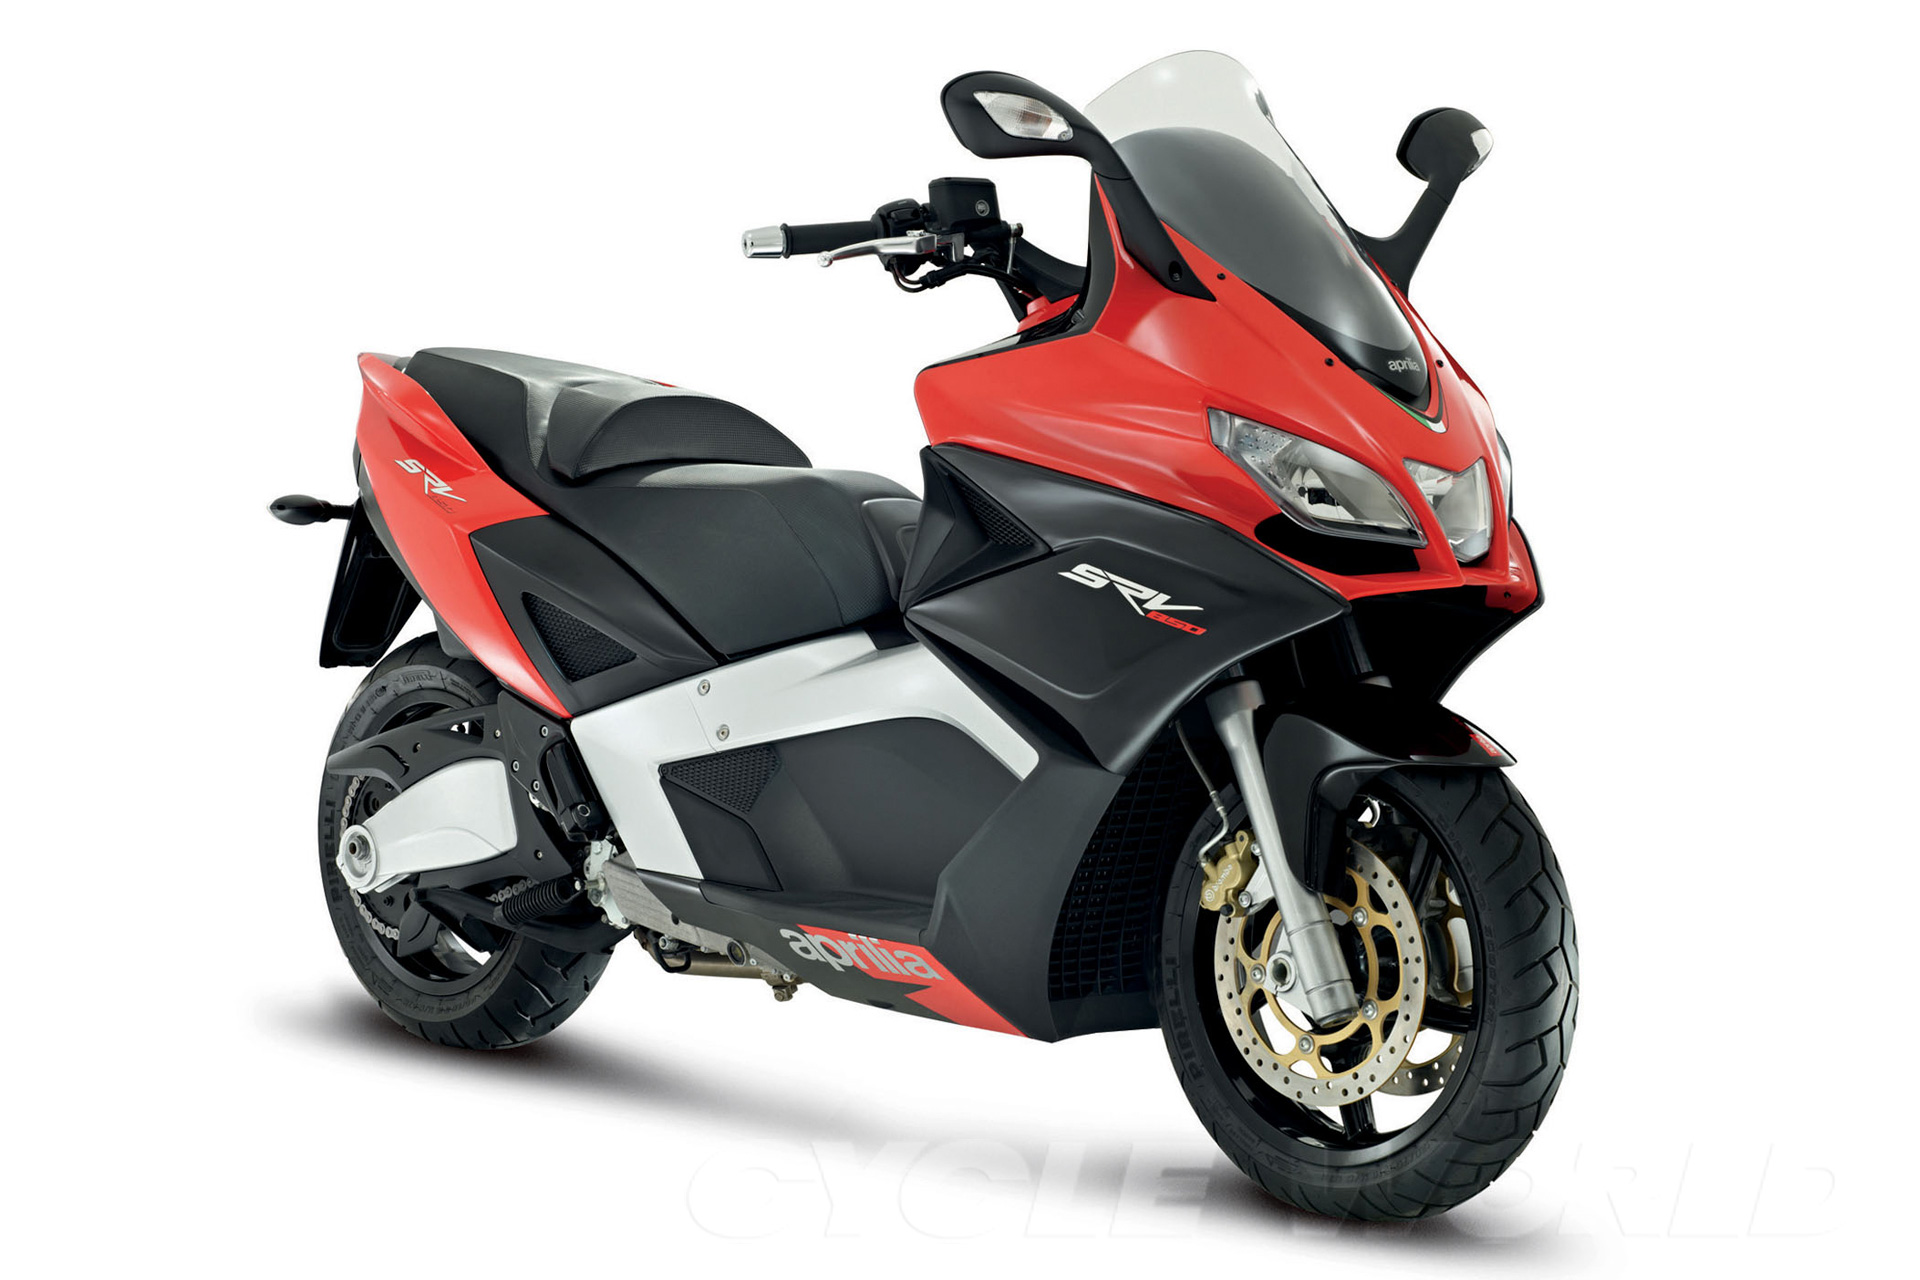 SRV 850 First Look Review- Aprilia Scooter Reviews- Photos | Cycle World